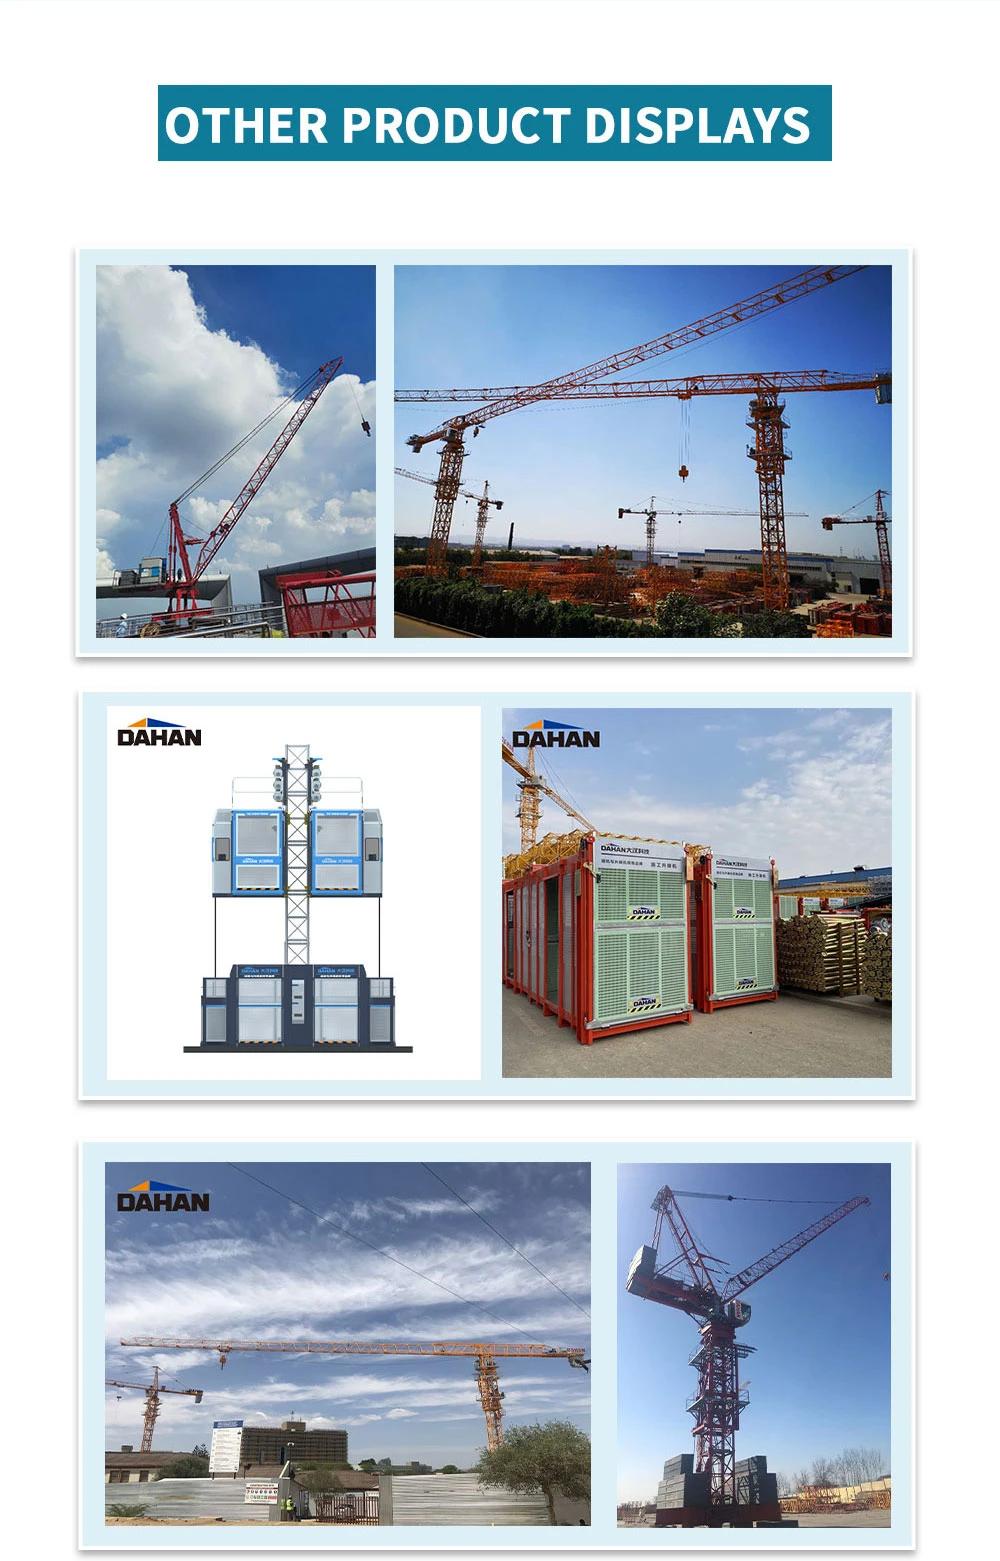 SGS CE Certified High Quality Tower Crane 5t 6t 8t 10t 12t 16t 25t Exported to Europe, Height Can Be Customized 100-250m